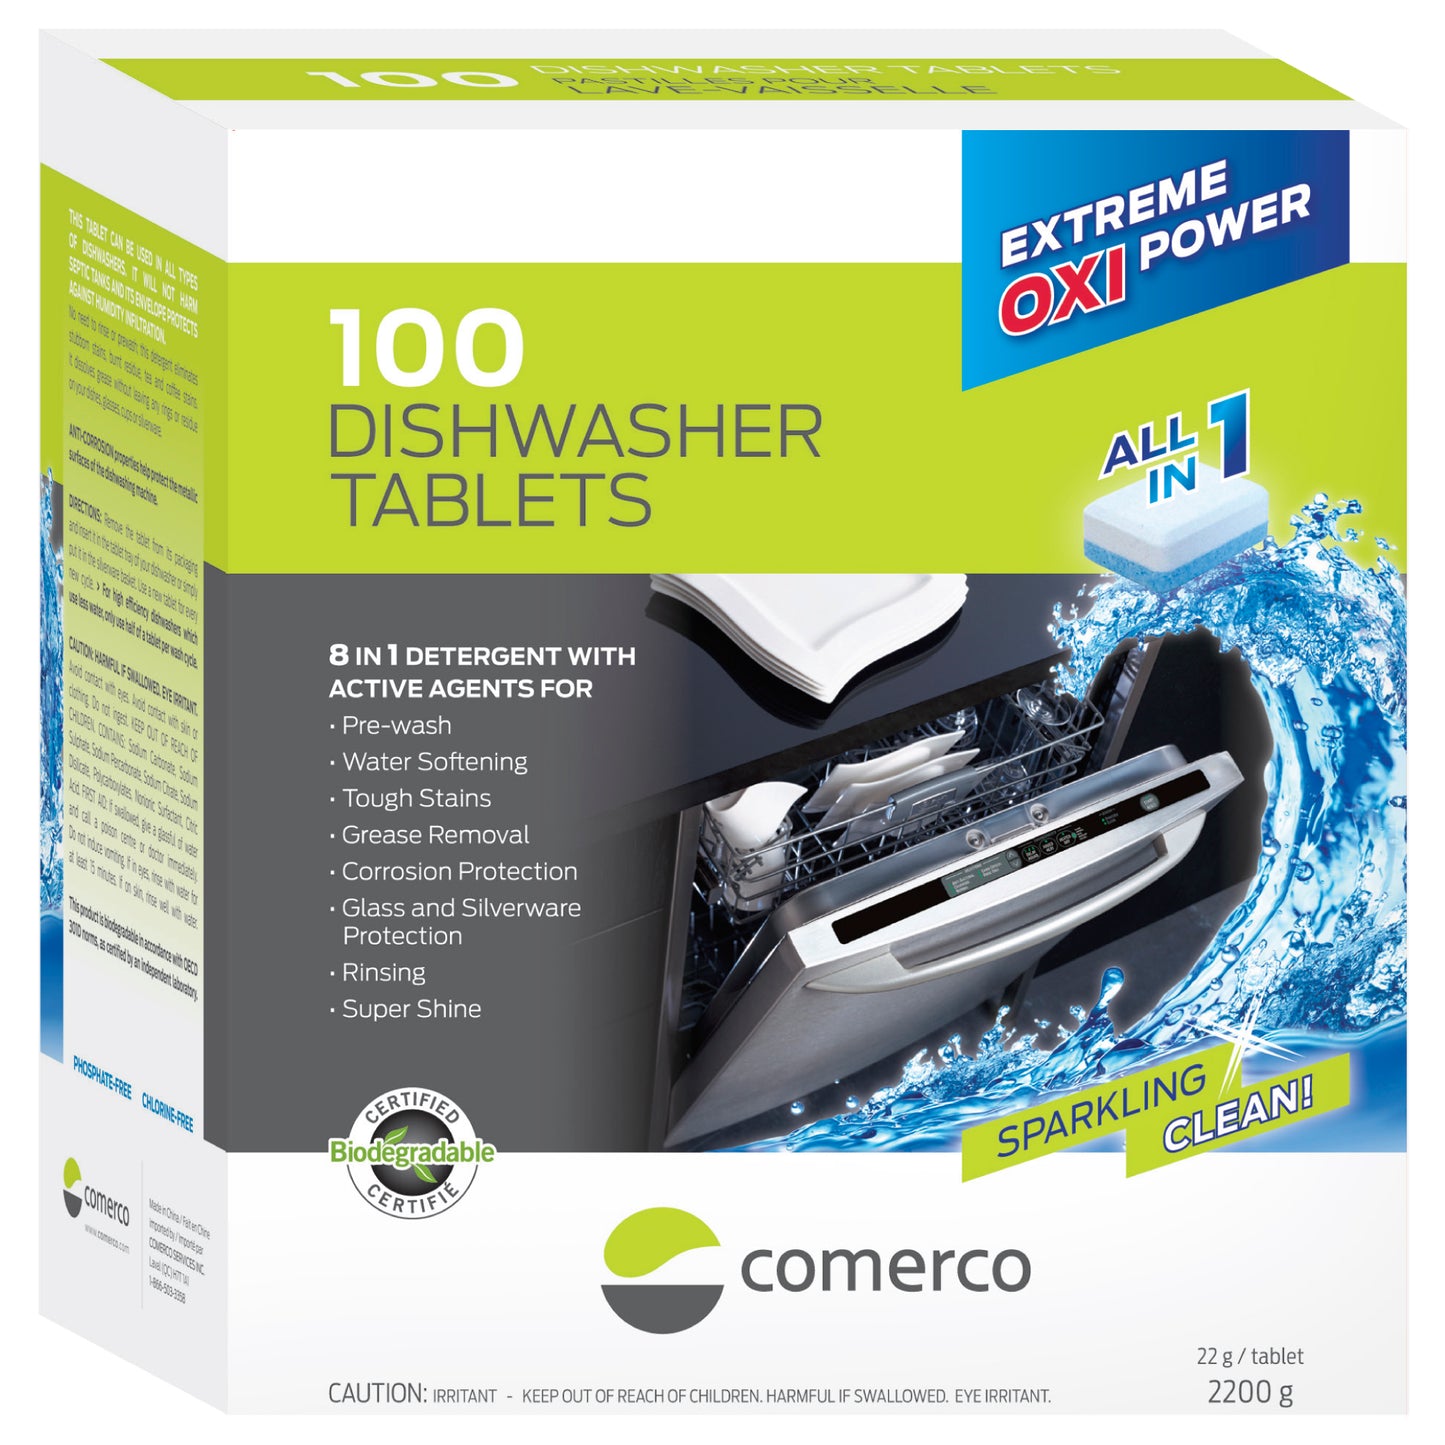 100 Dishwasher Tablets Extreme Oxi Power - All in 1